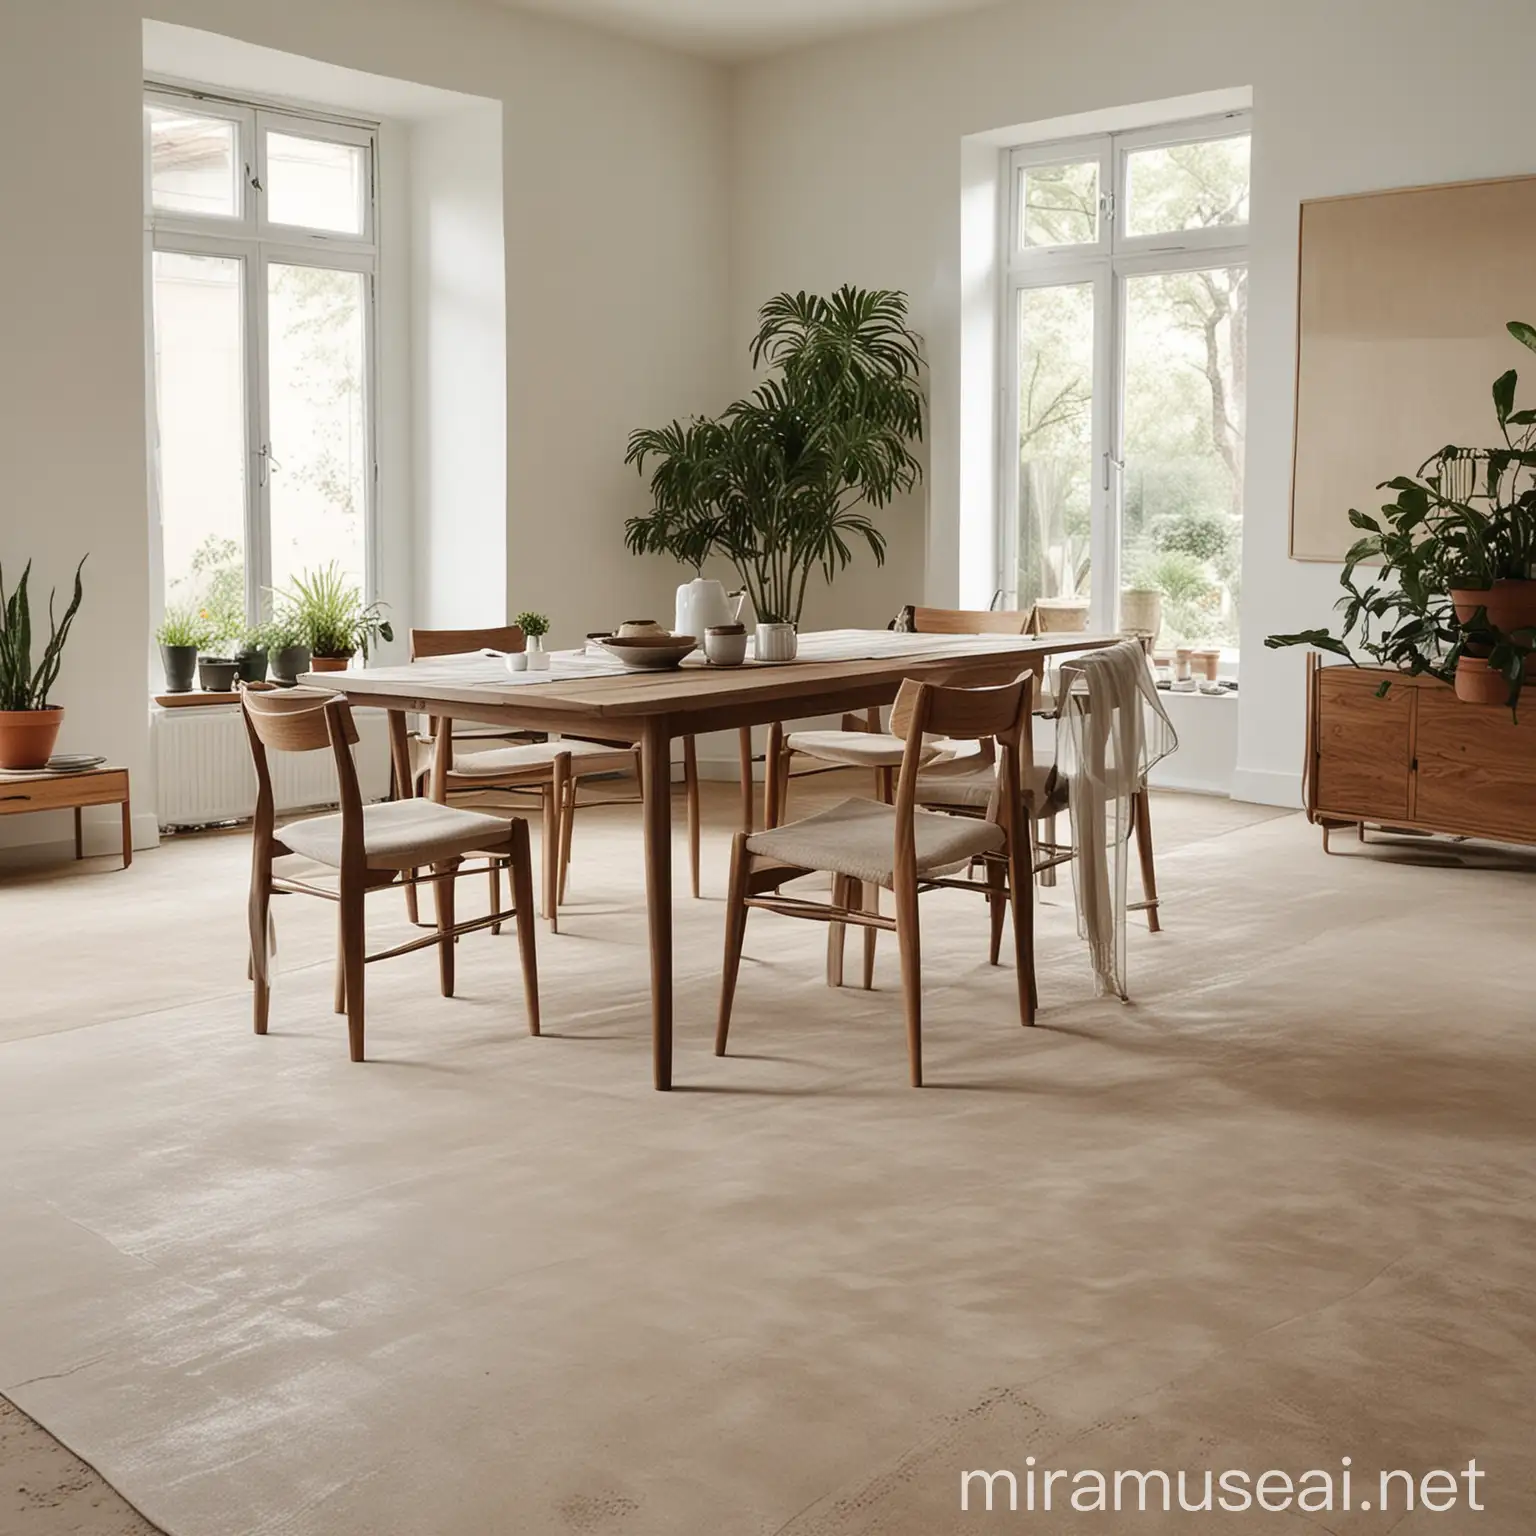 Minimalist Dining Room with Natural Elements and Sandy Carpet